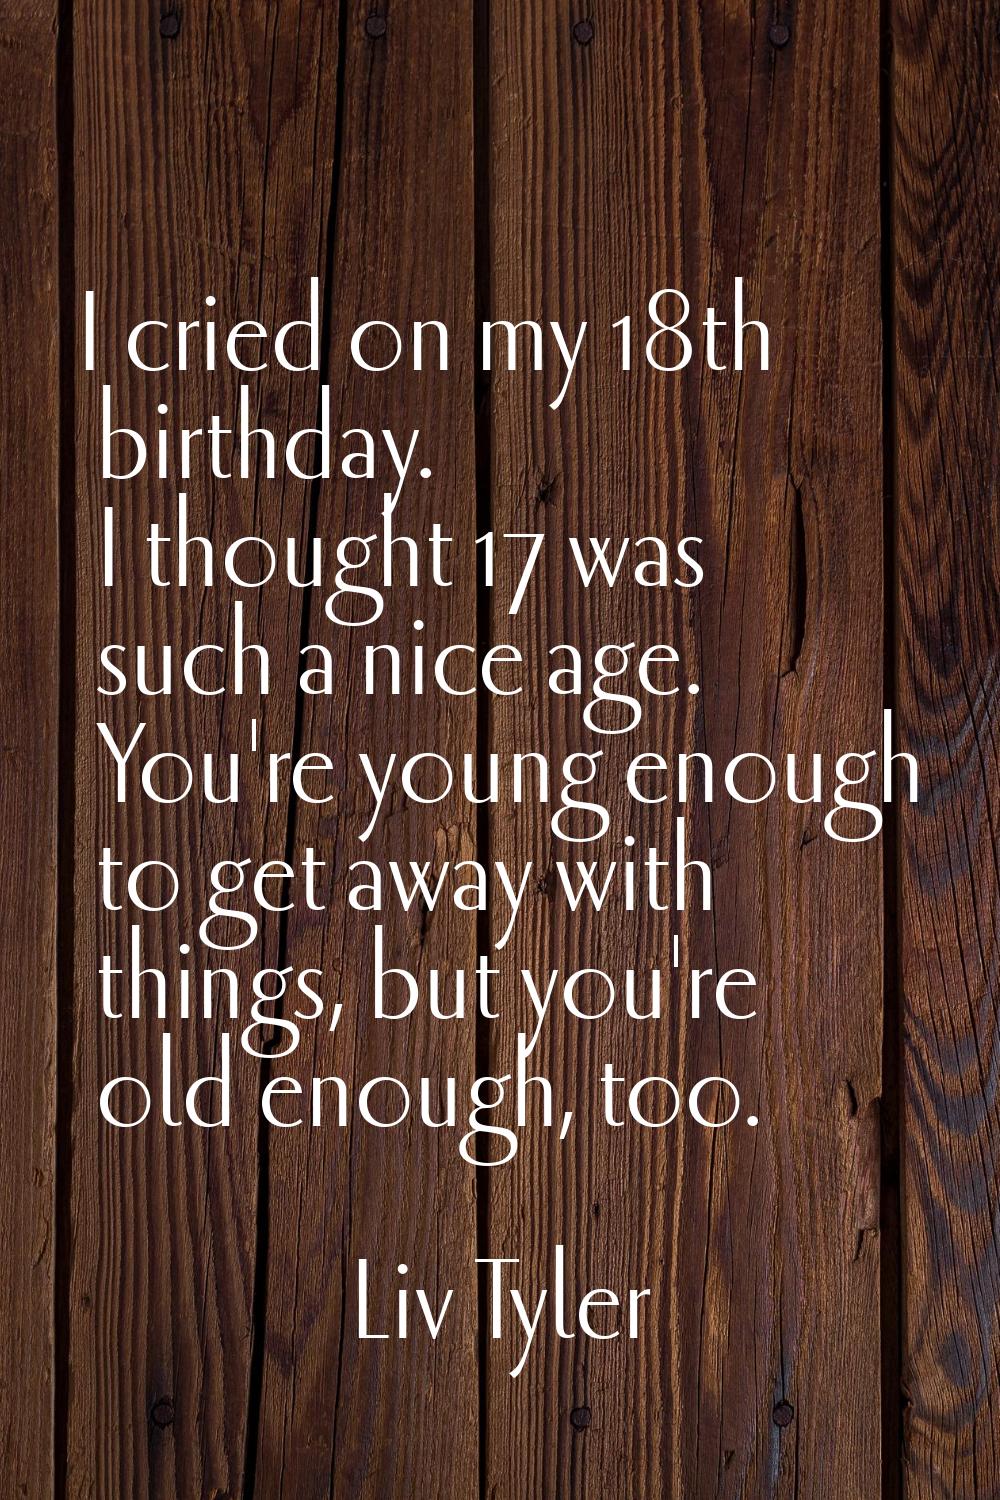 I cried on my 18th birthday. I thought 17 was such a nice age. You're young enough to get away with